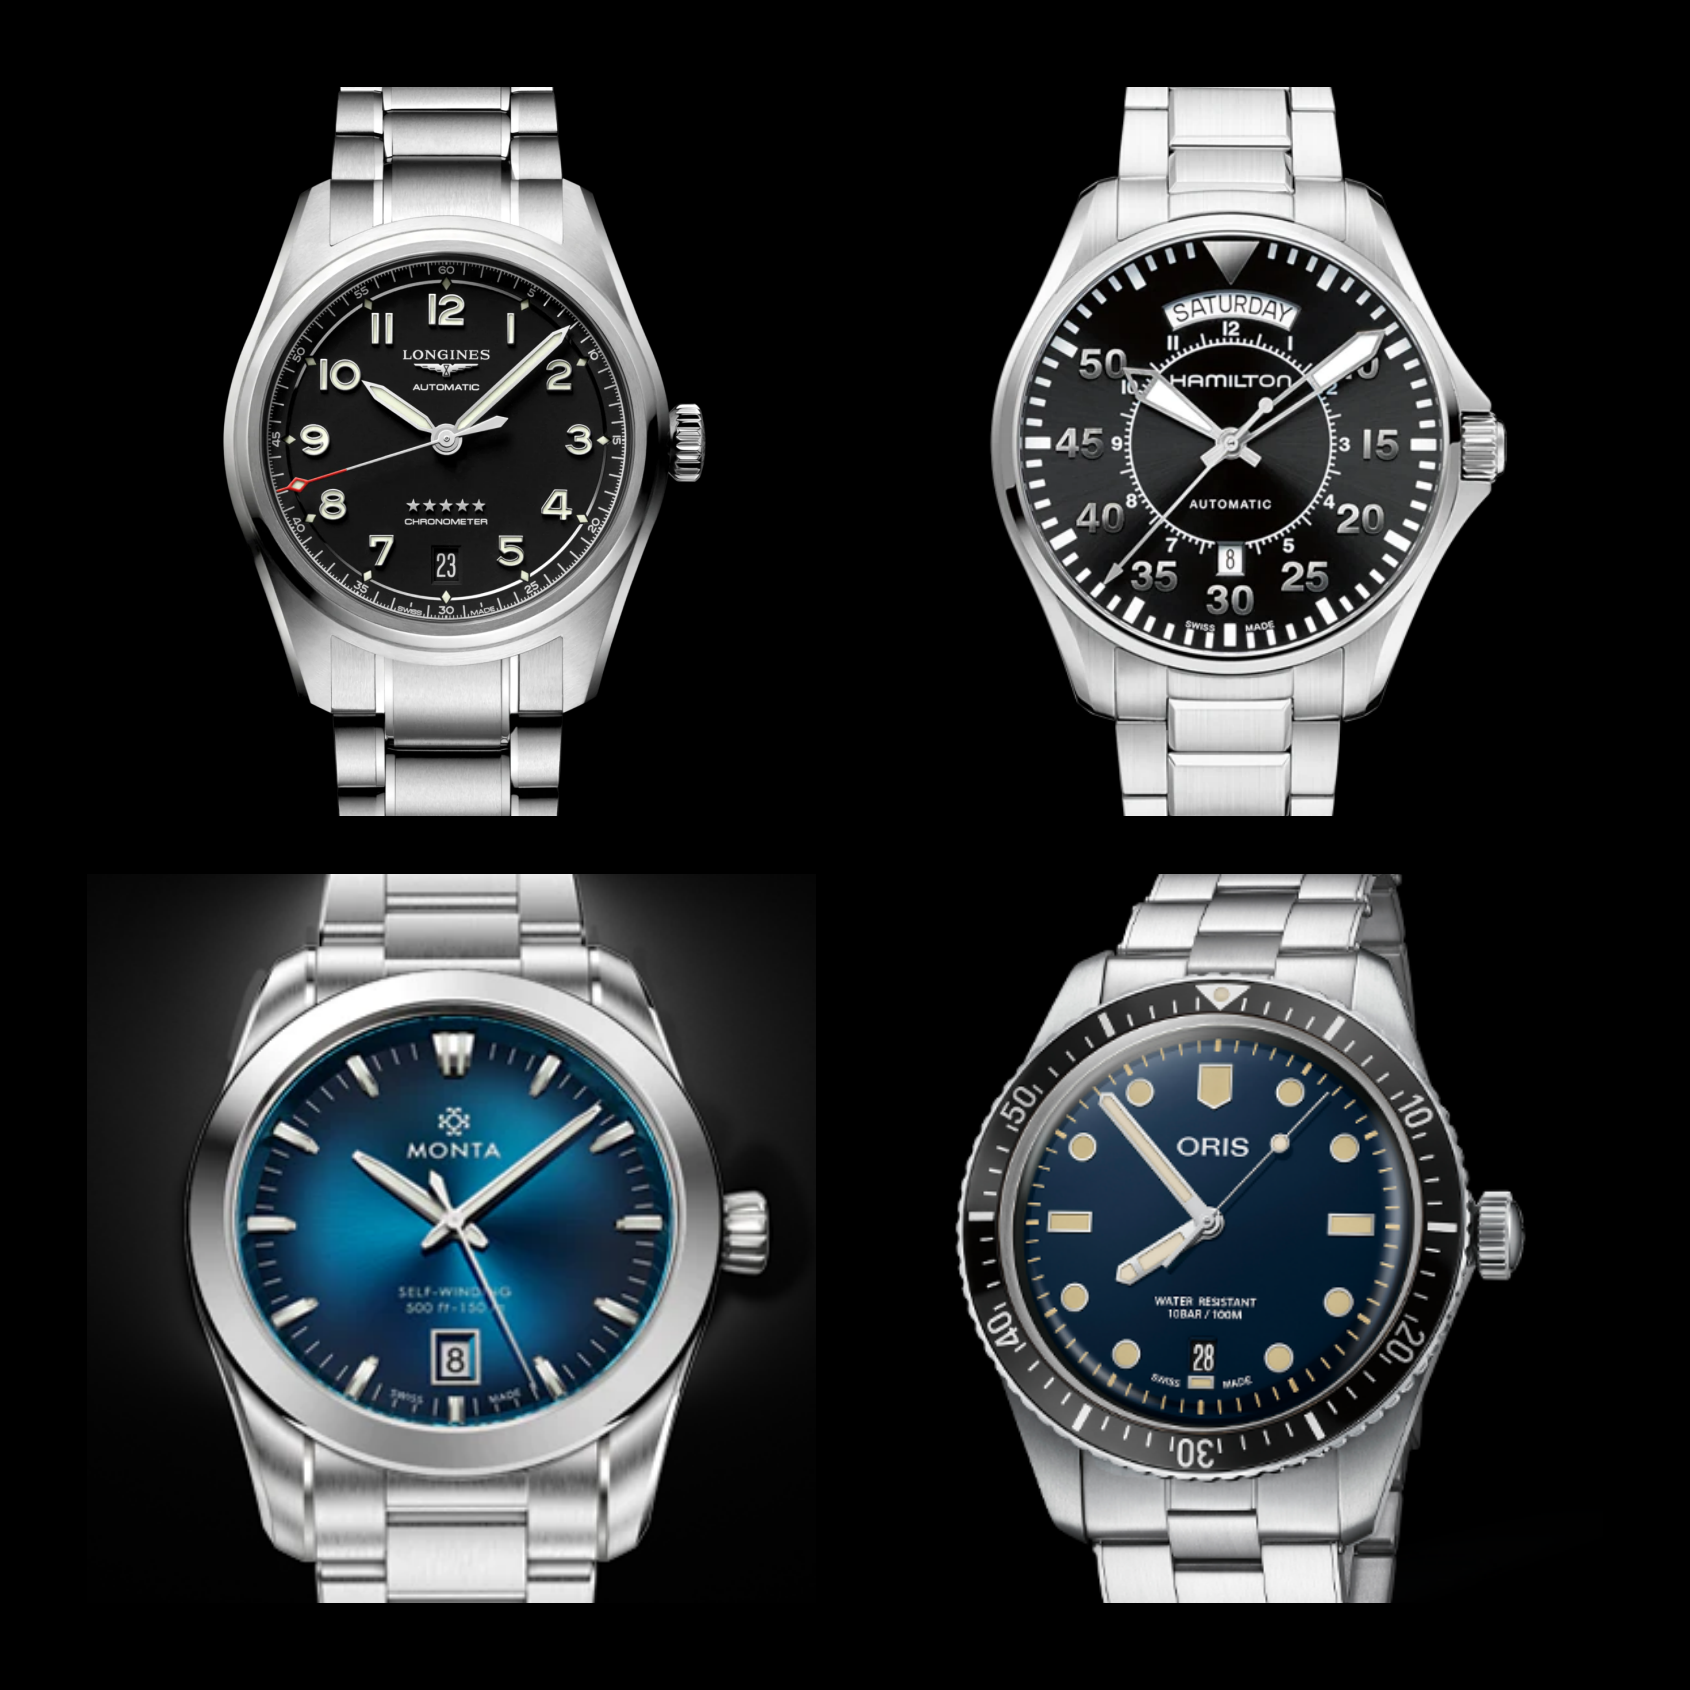 Four watches you should buy instead of Portnoy’s Brick Watch – US$2.4K or less